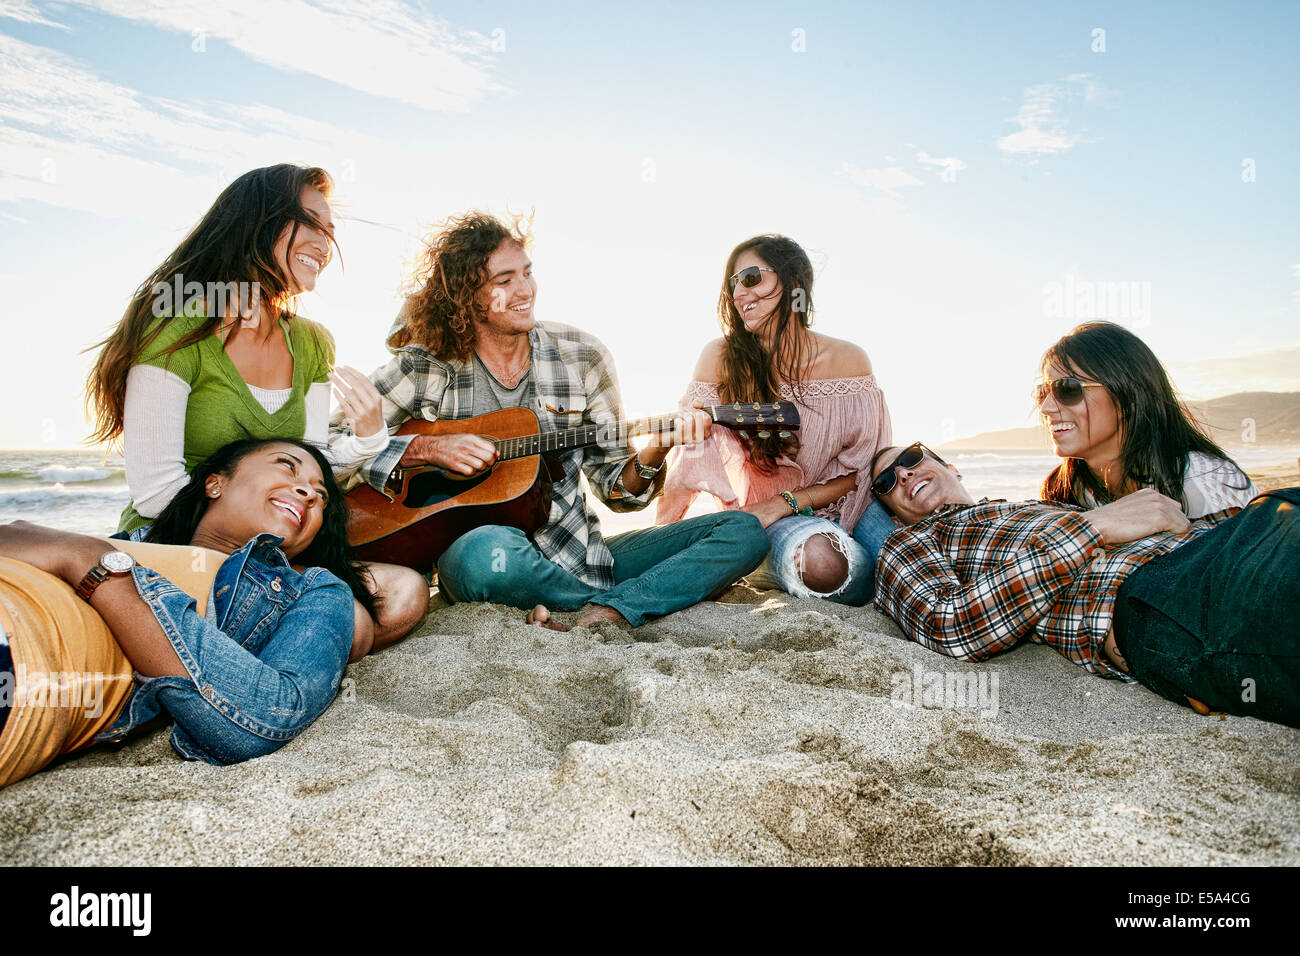 Friends relaxing together on beach Stock Photo